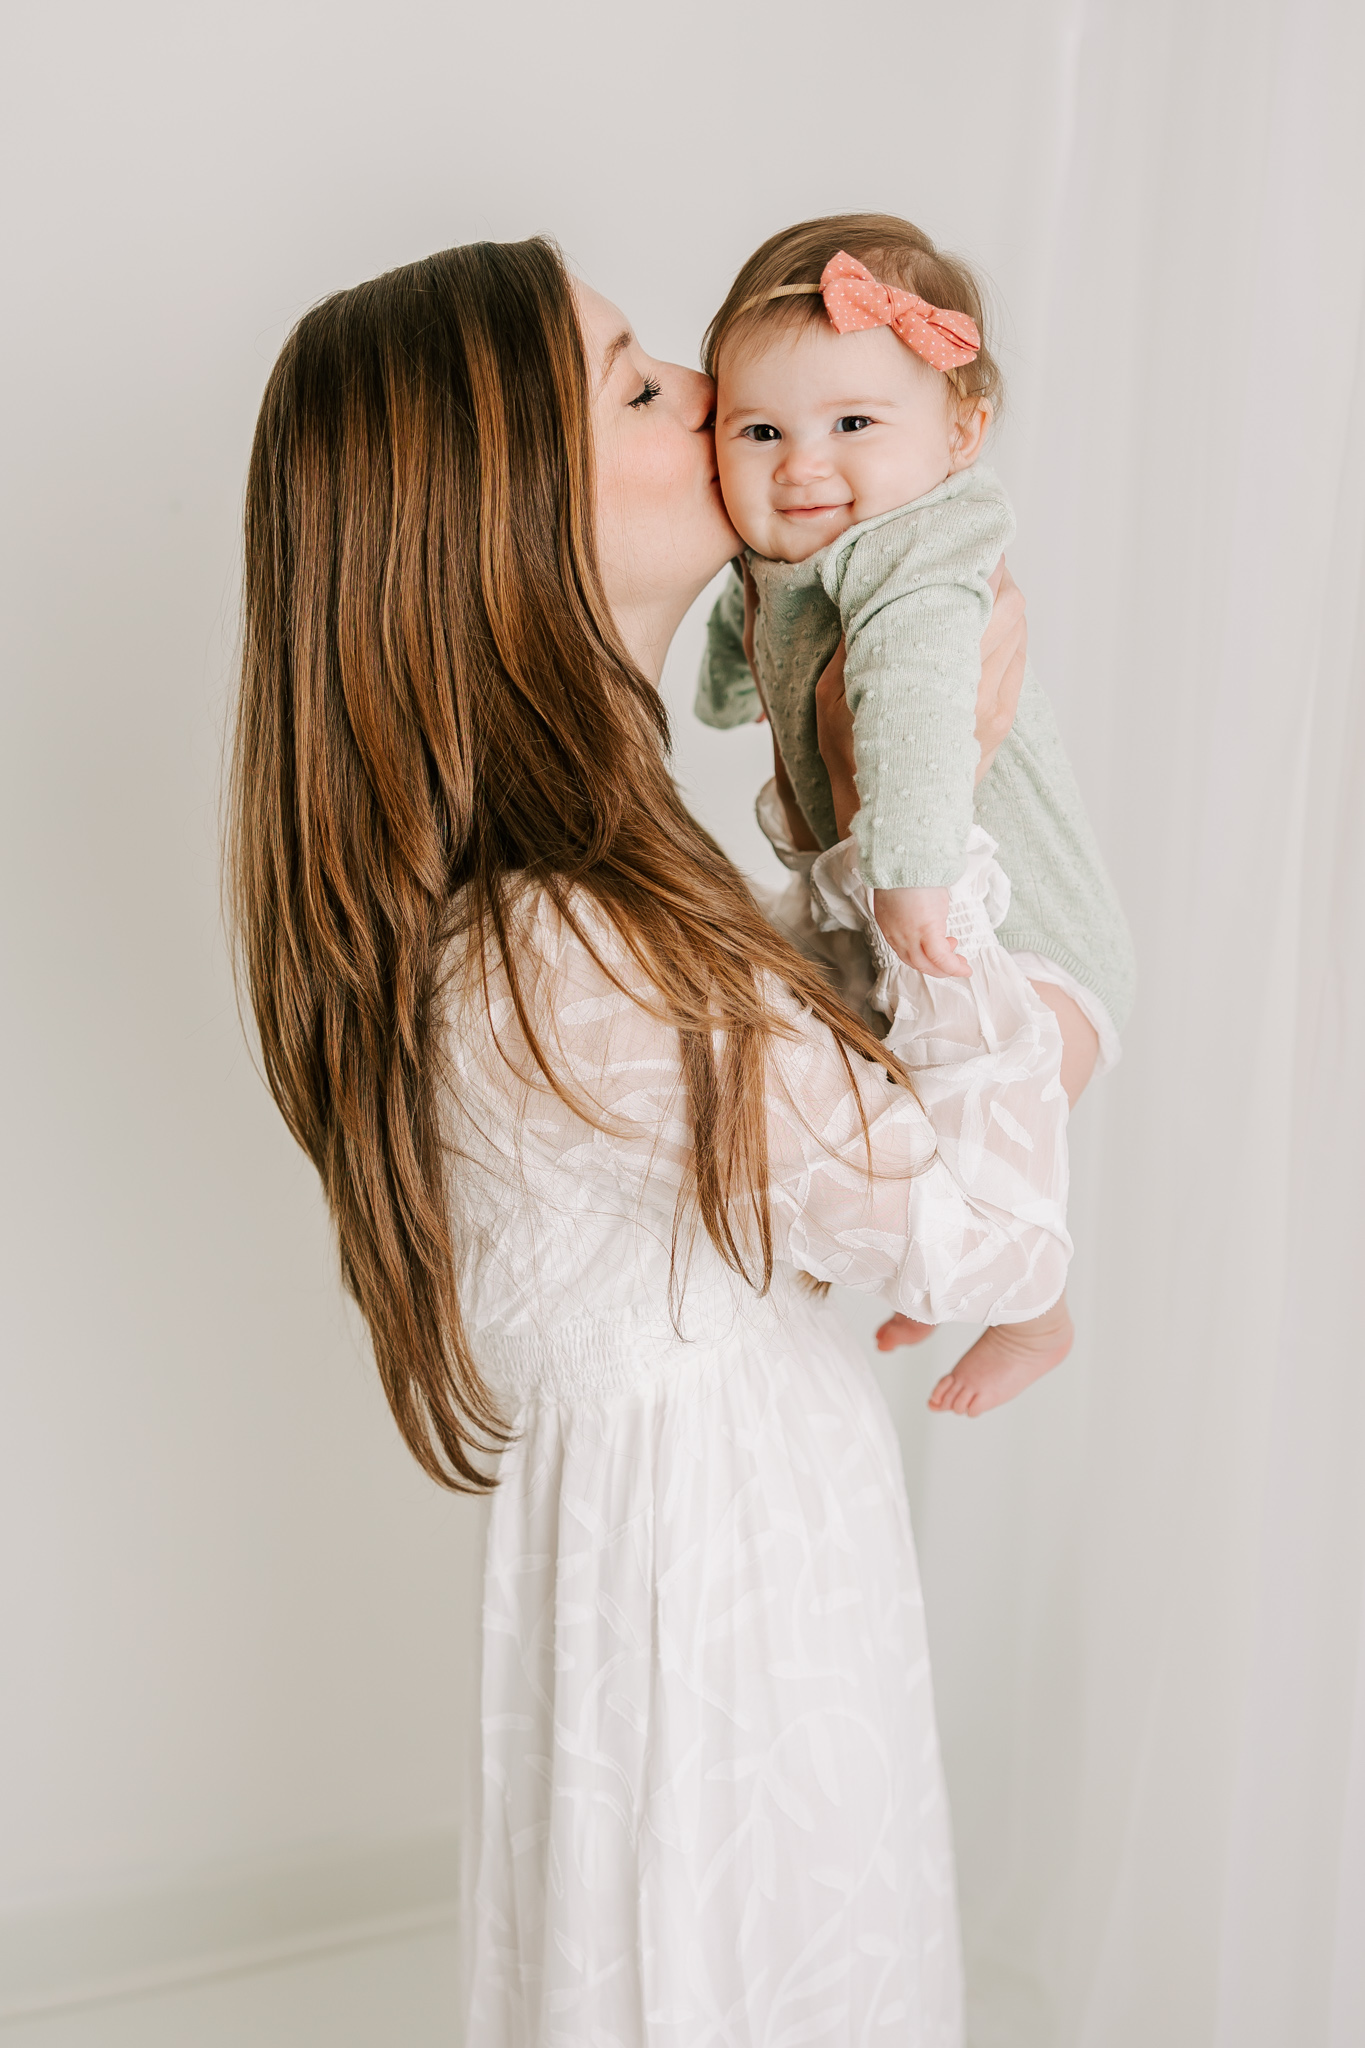 Mom and daughter sharing a special moment during their atlanta baby photography session with molly berry photography.